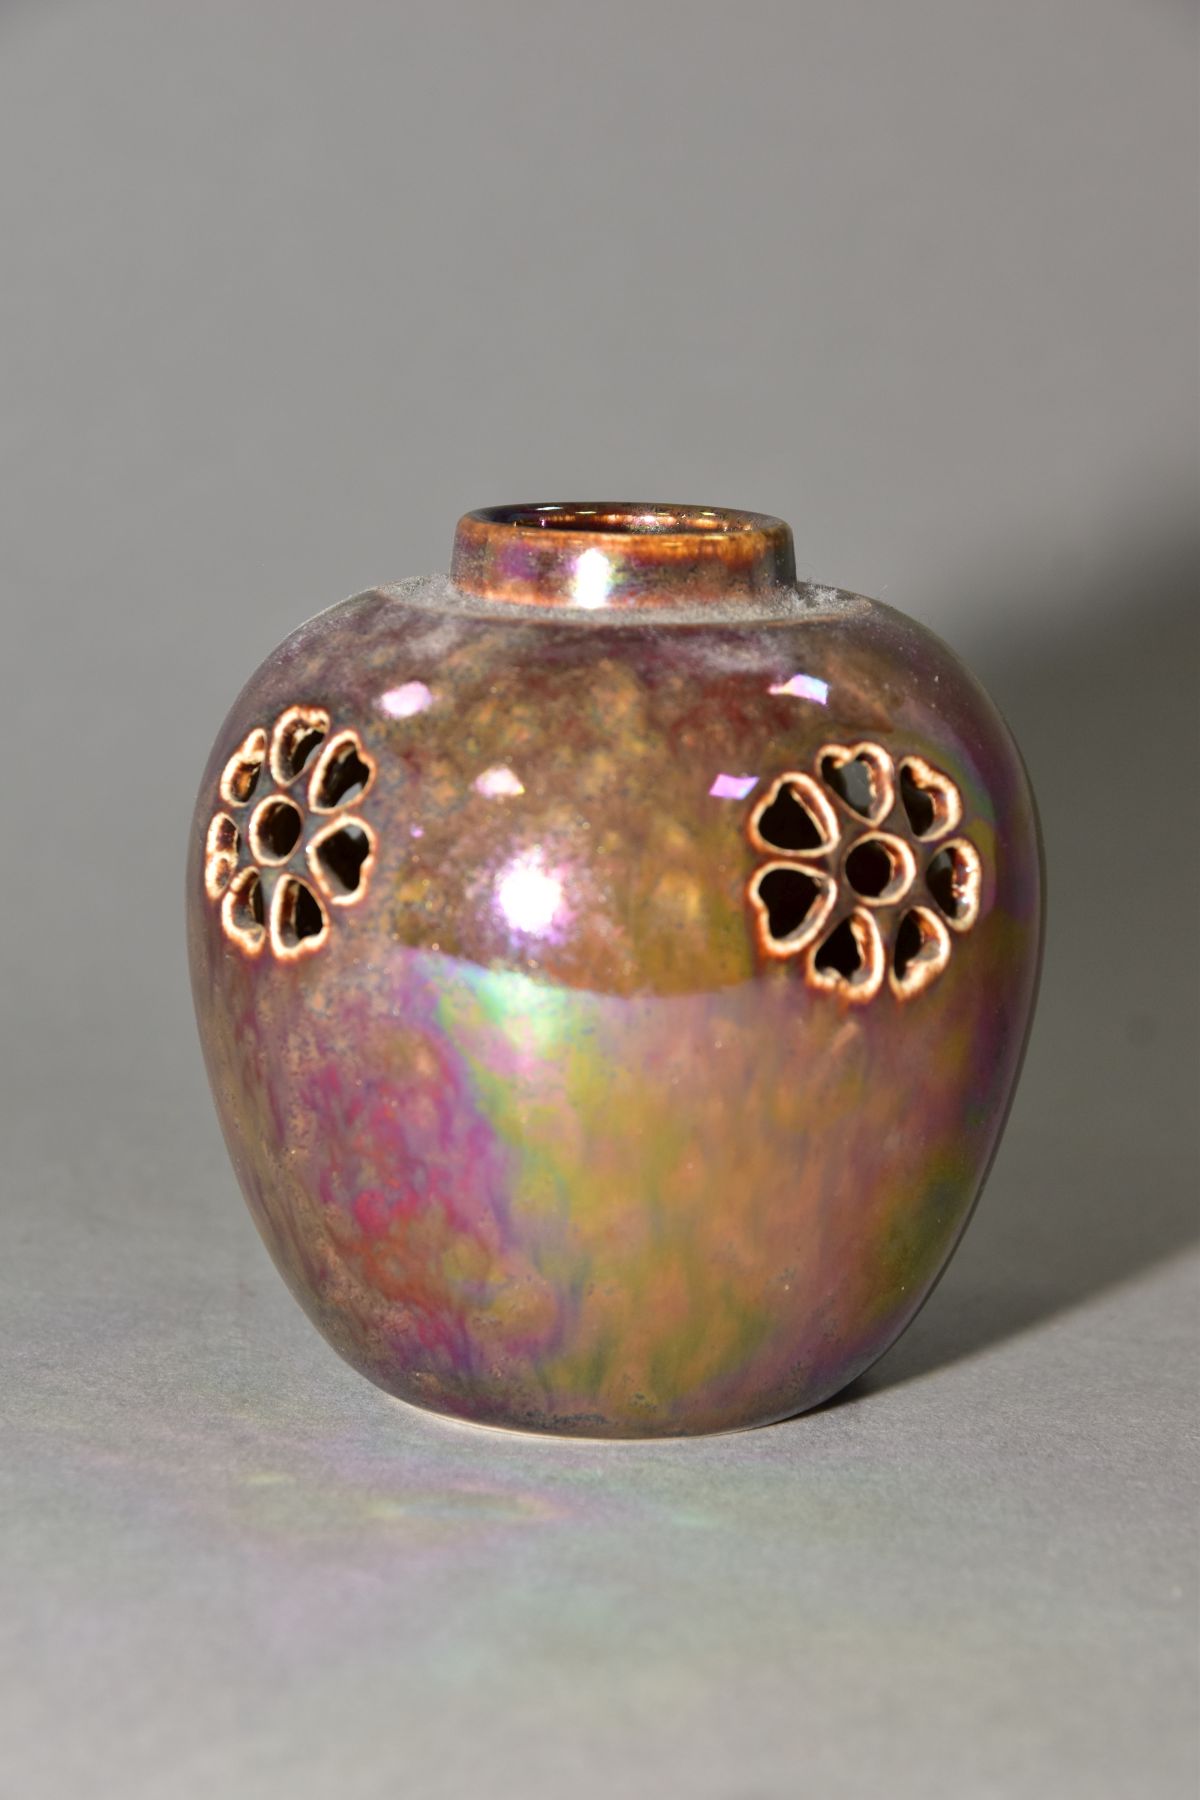 RUSKIN POTTERY, a brown lustre reticulated ginger/pot pourri jar, missing lid, the body pierced with